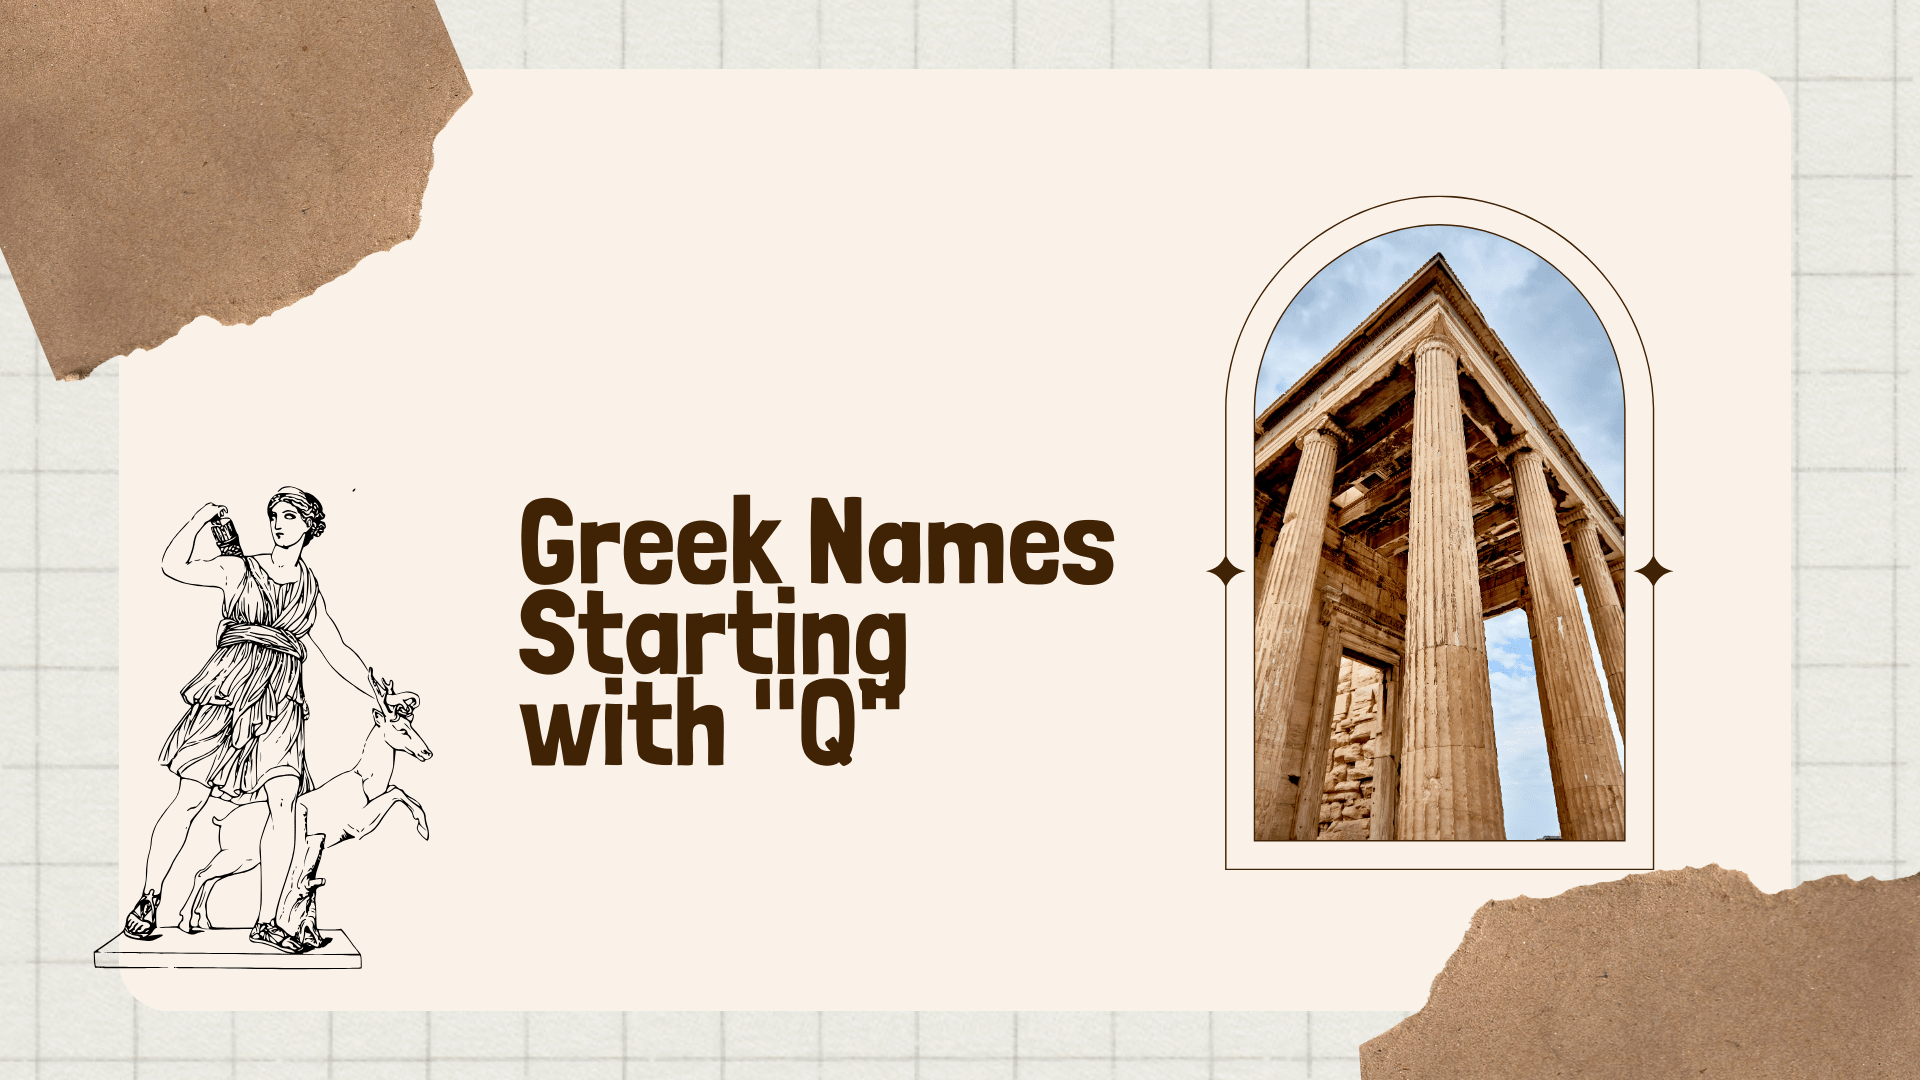 Greek Names Starting with "Q"